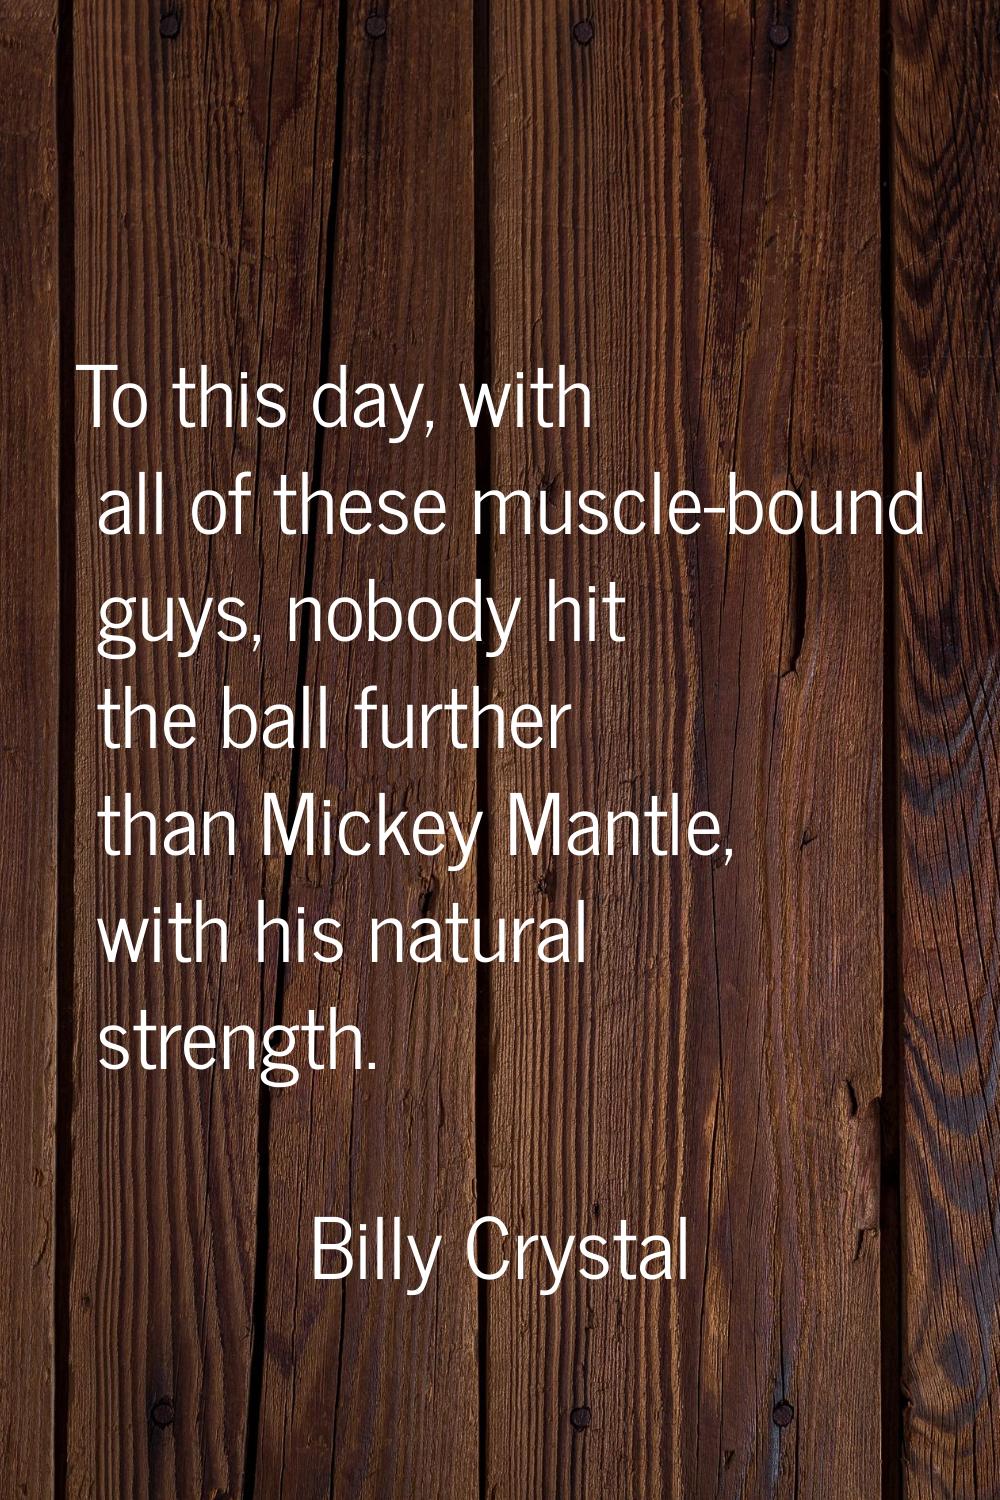 To this day, with all of these muscle-bound guys, nobody hit the ball further than Mickey Mantle, w